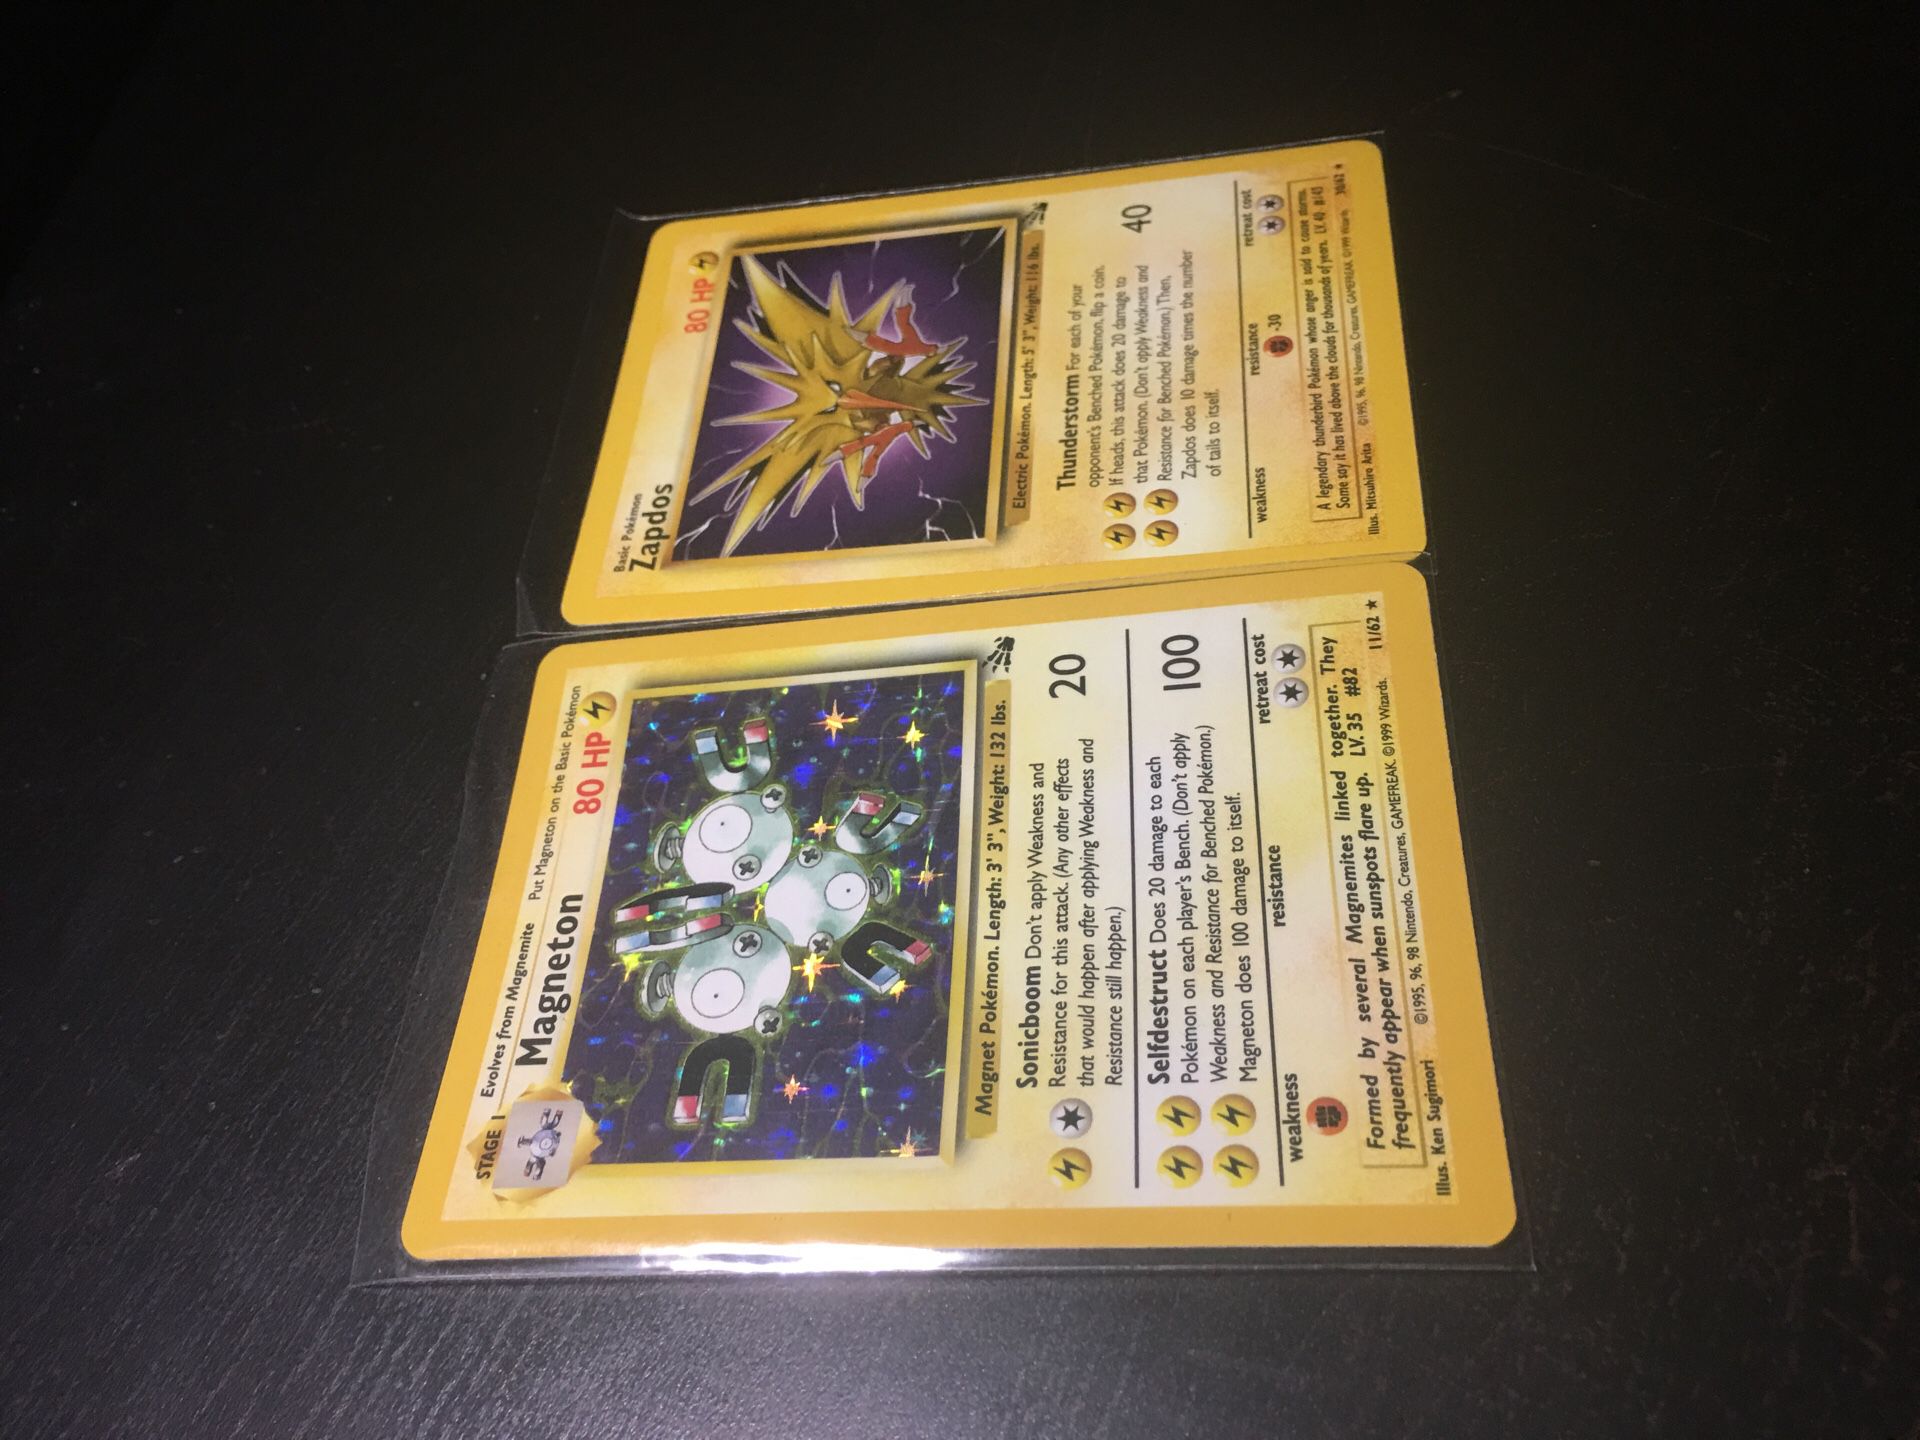 Original Pokemon Cards from 1999 - Holographic Rare Highly Collectible Magneton and Zapdos Legendary Bird from First 1st Base Fossil Set!